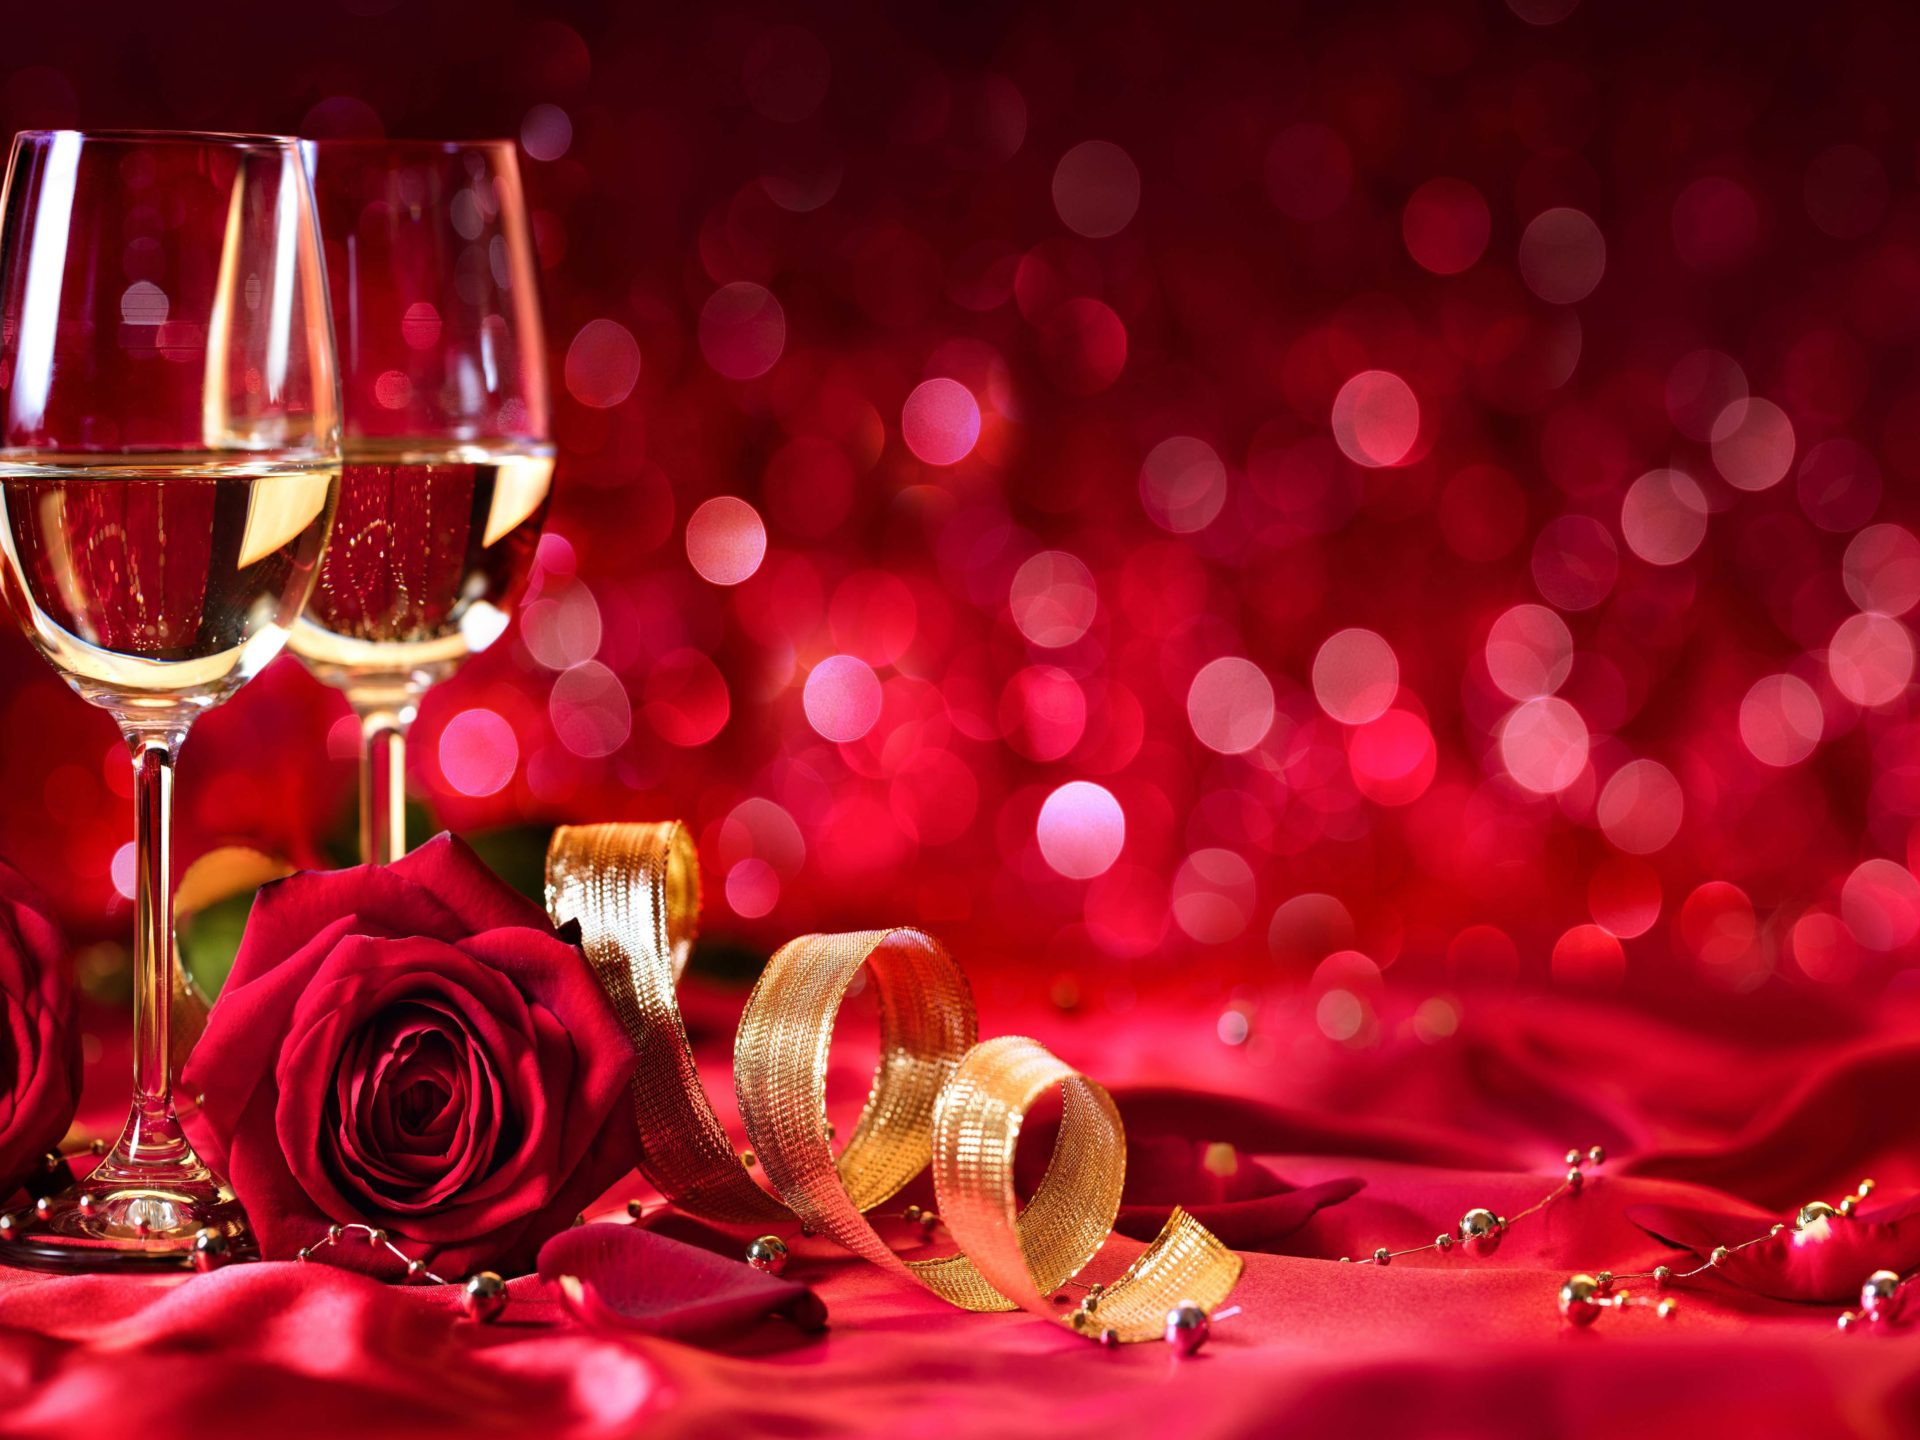 Valentine's Day Romantic Celebration Two Glasses With White Wine Red Roses Red Background HD Love Wallpaper, Wallpaper13.com